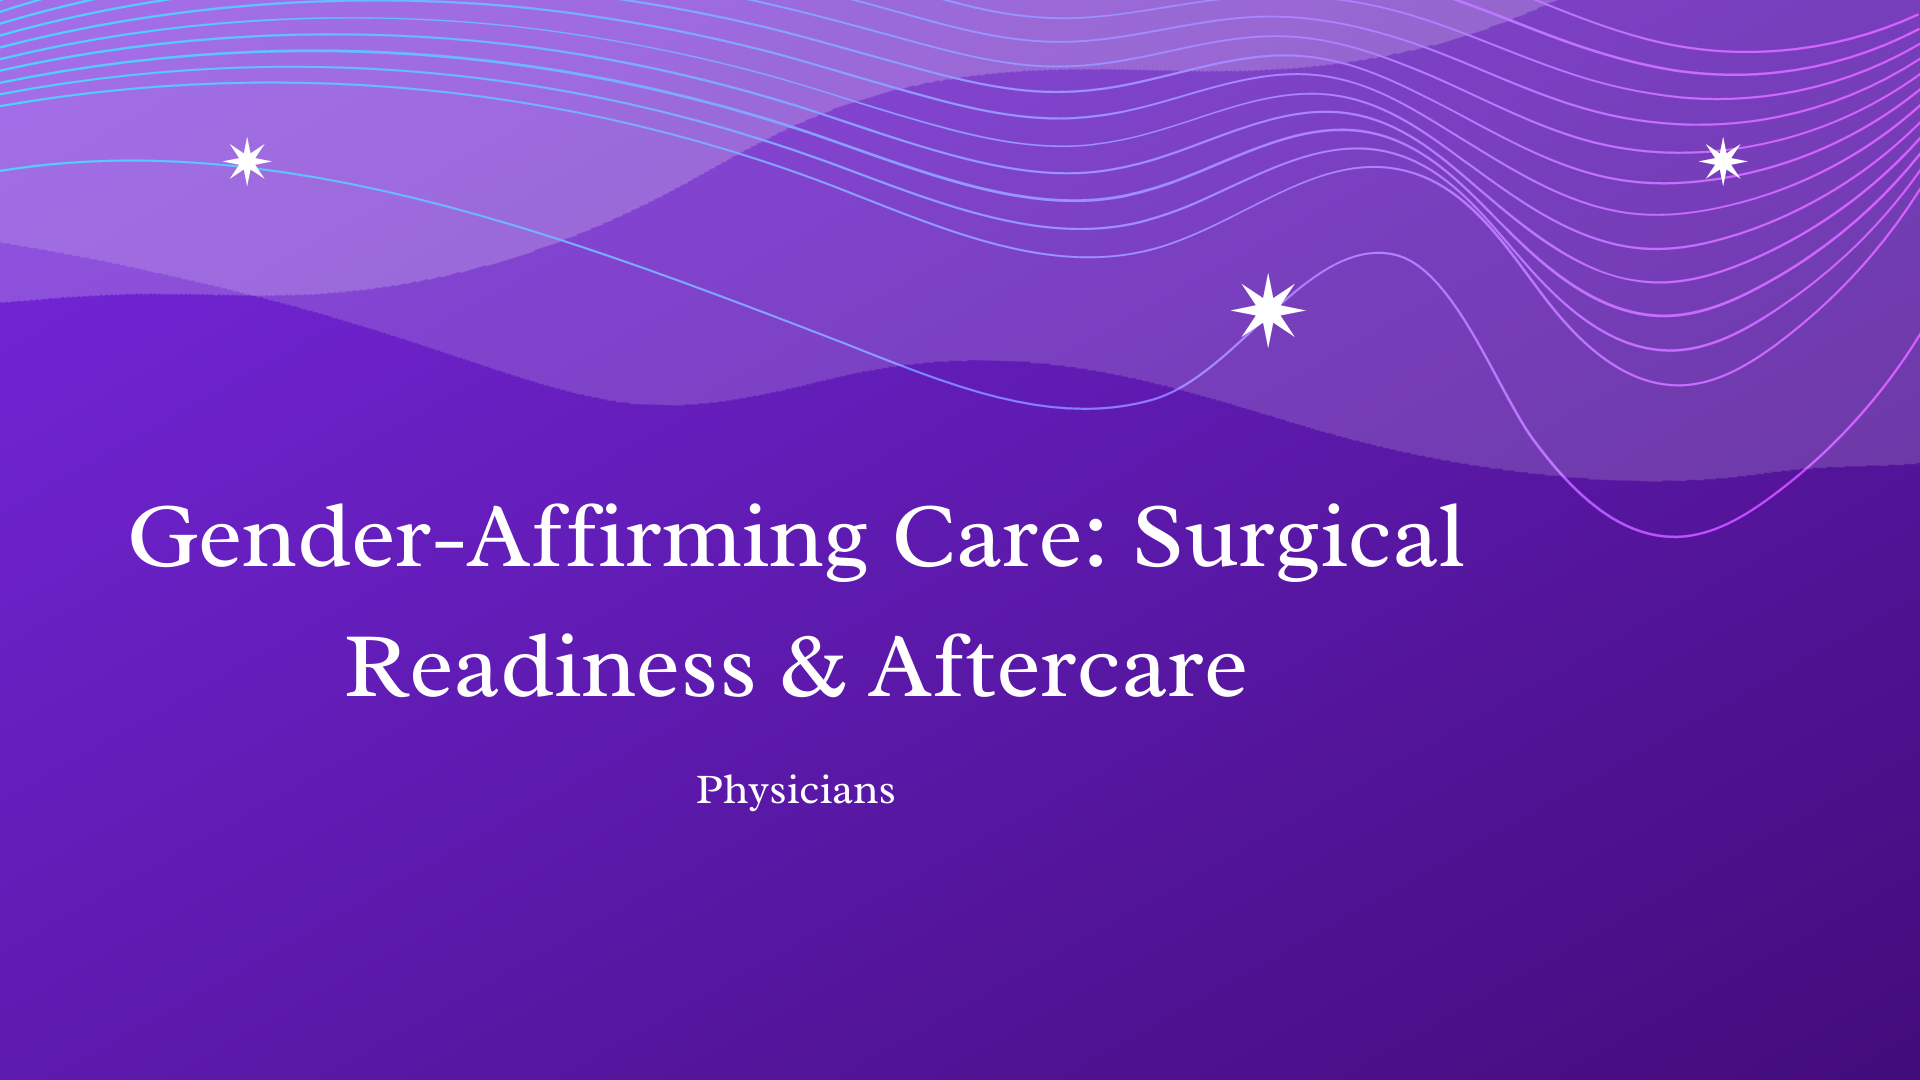 Gender-Affirming Care: Surgical Readiness & Aftercare - Physicians | C